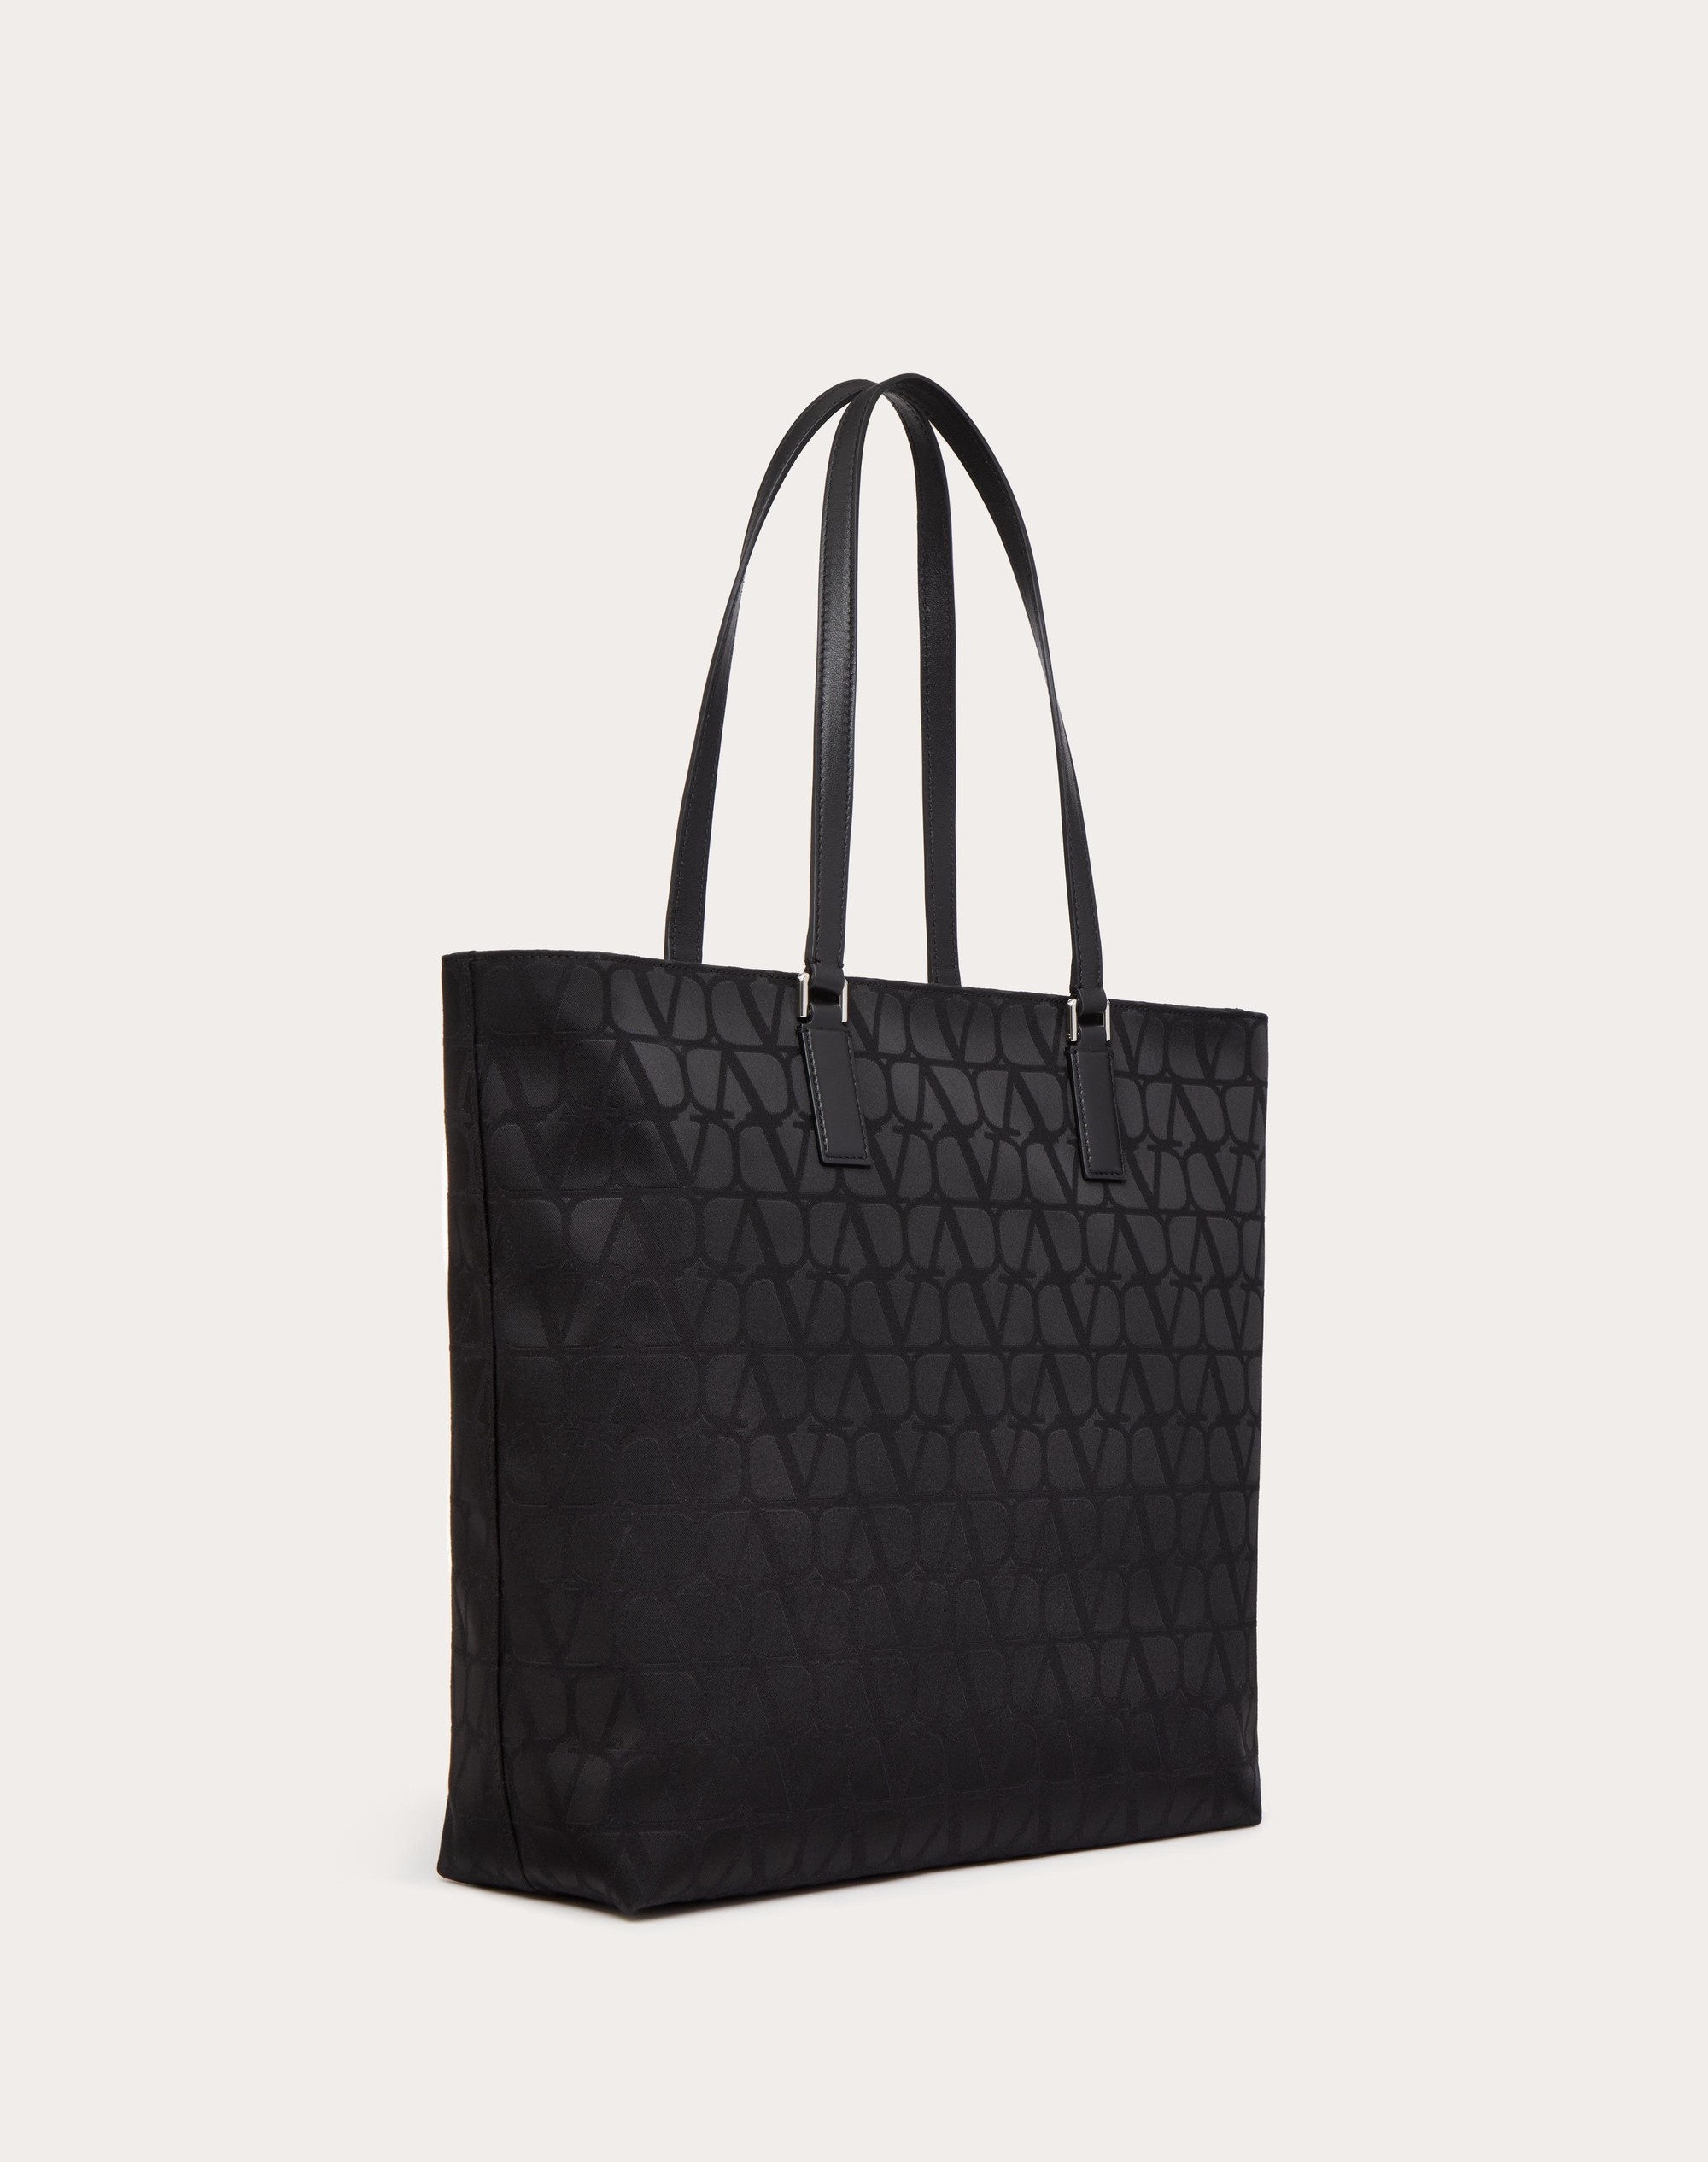 TOILE ICONOGRAPHE SHOPPING BAG IN TECHNICAL FABRIC WITH LEATHER DETAILS - 3